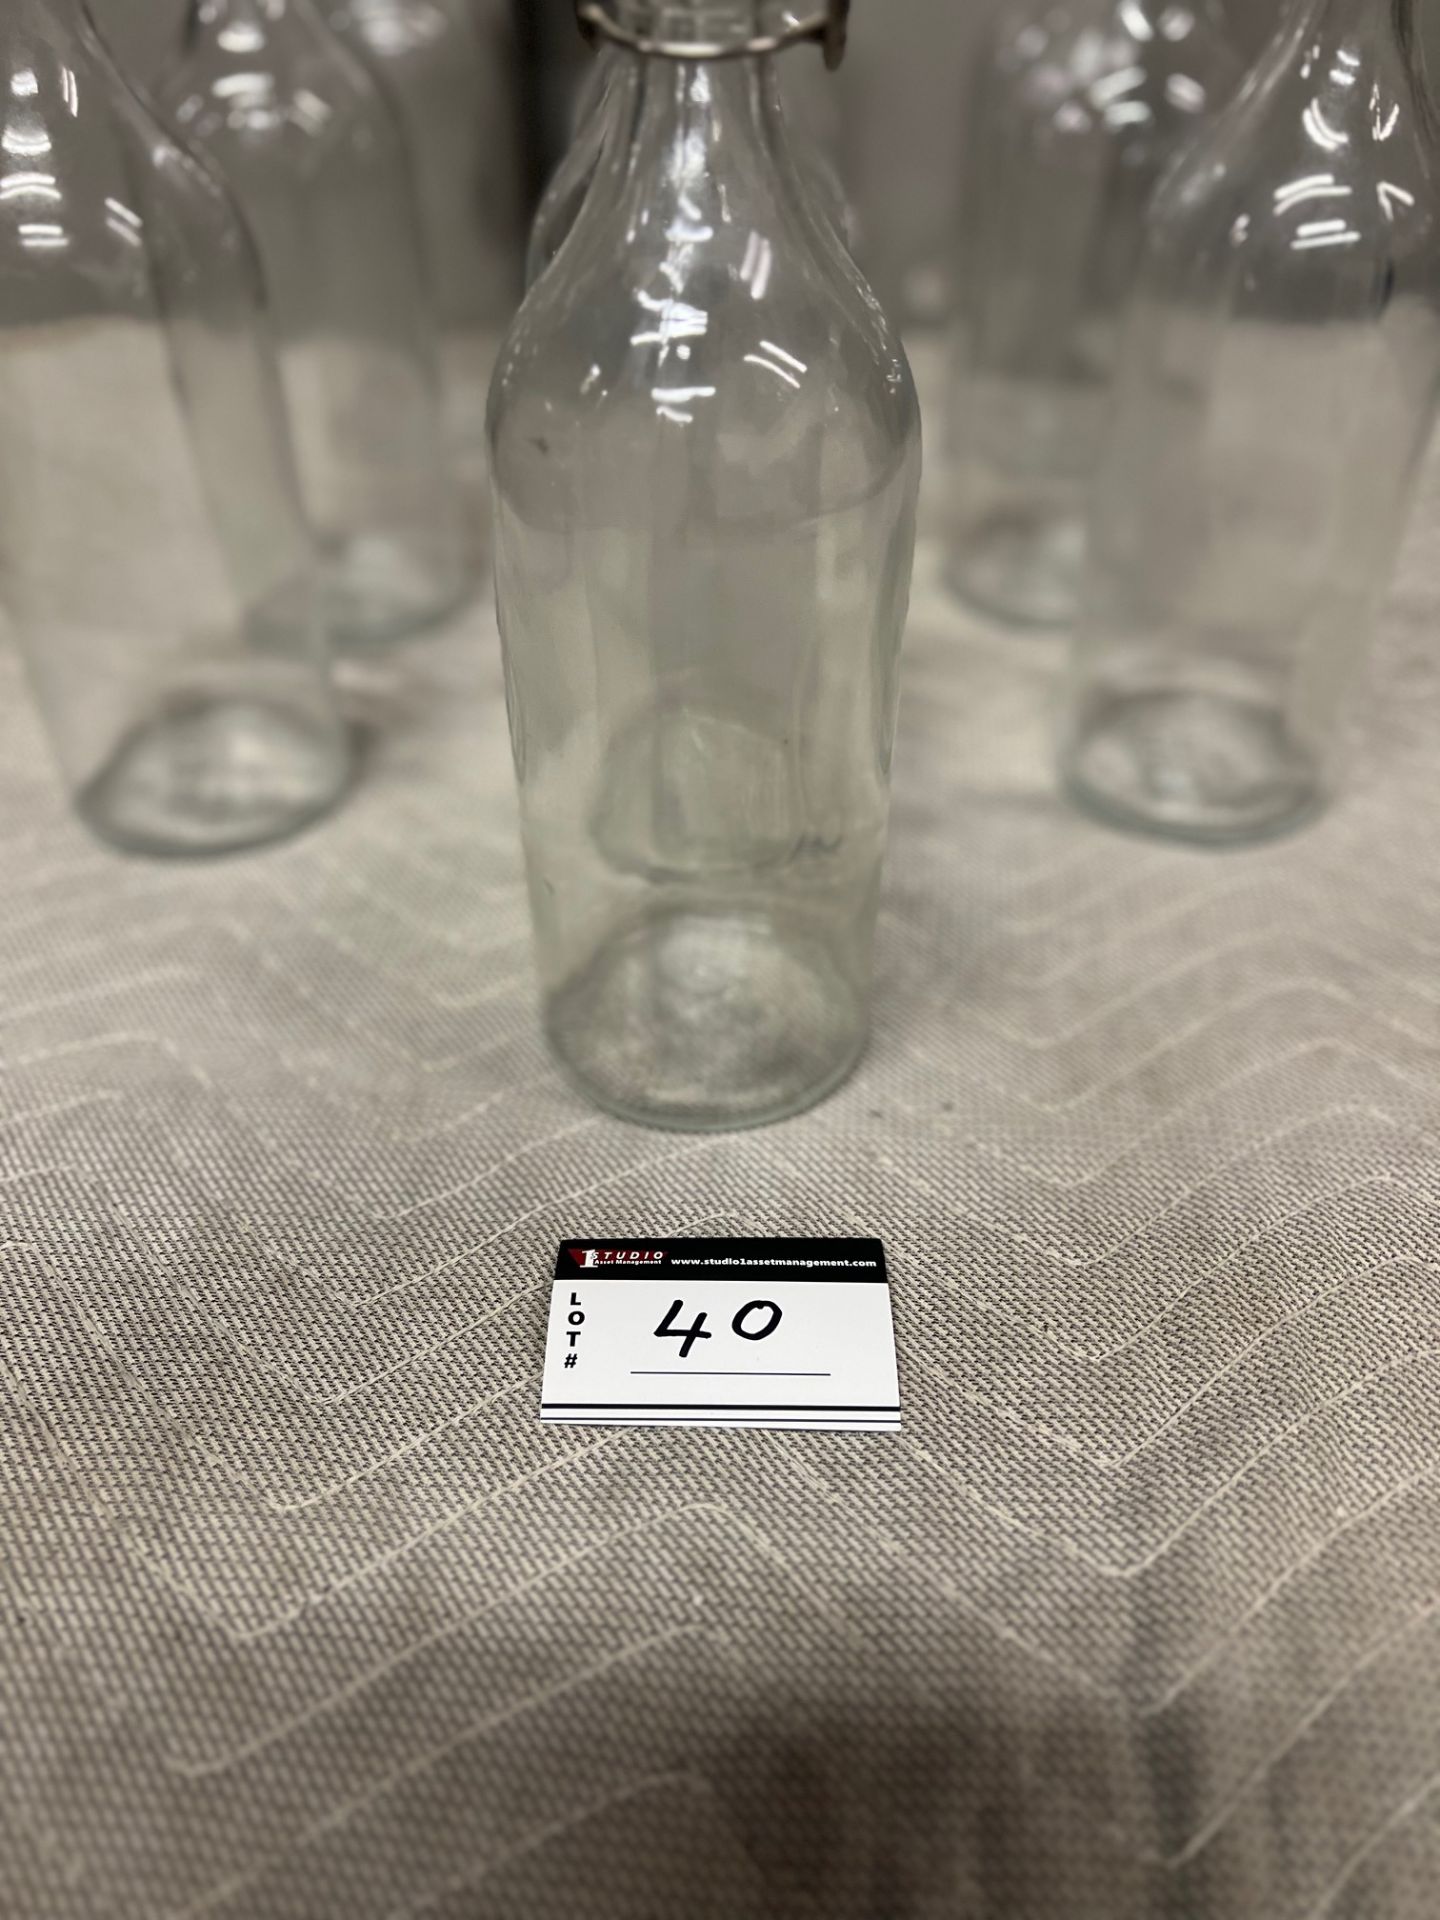 LOT/10(1 QUART) SERVABLE GLASS WATER CONTAINERS - Image 3 of 3